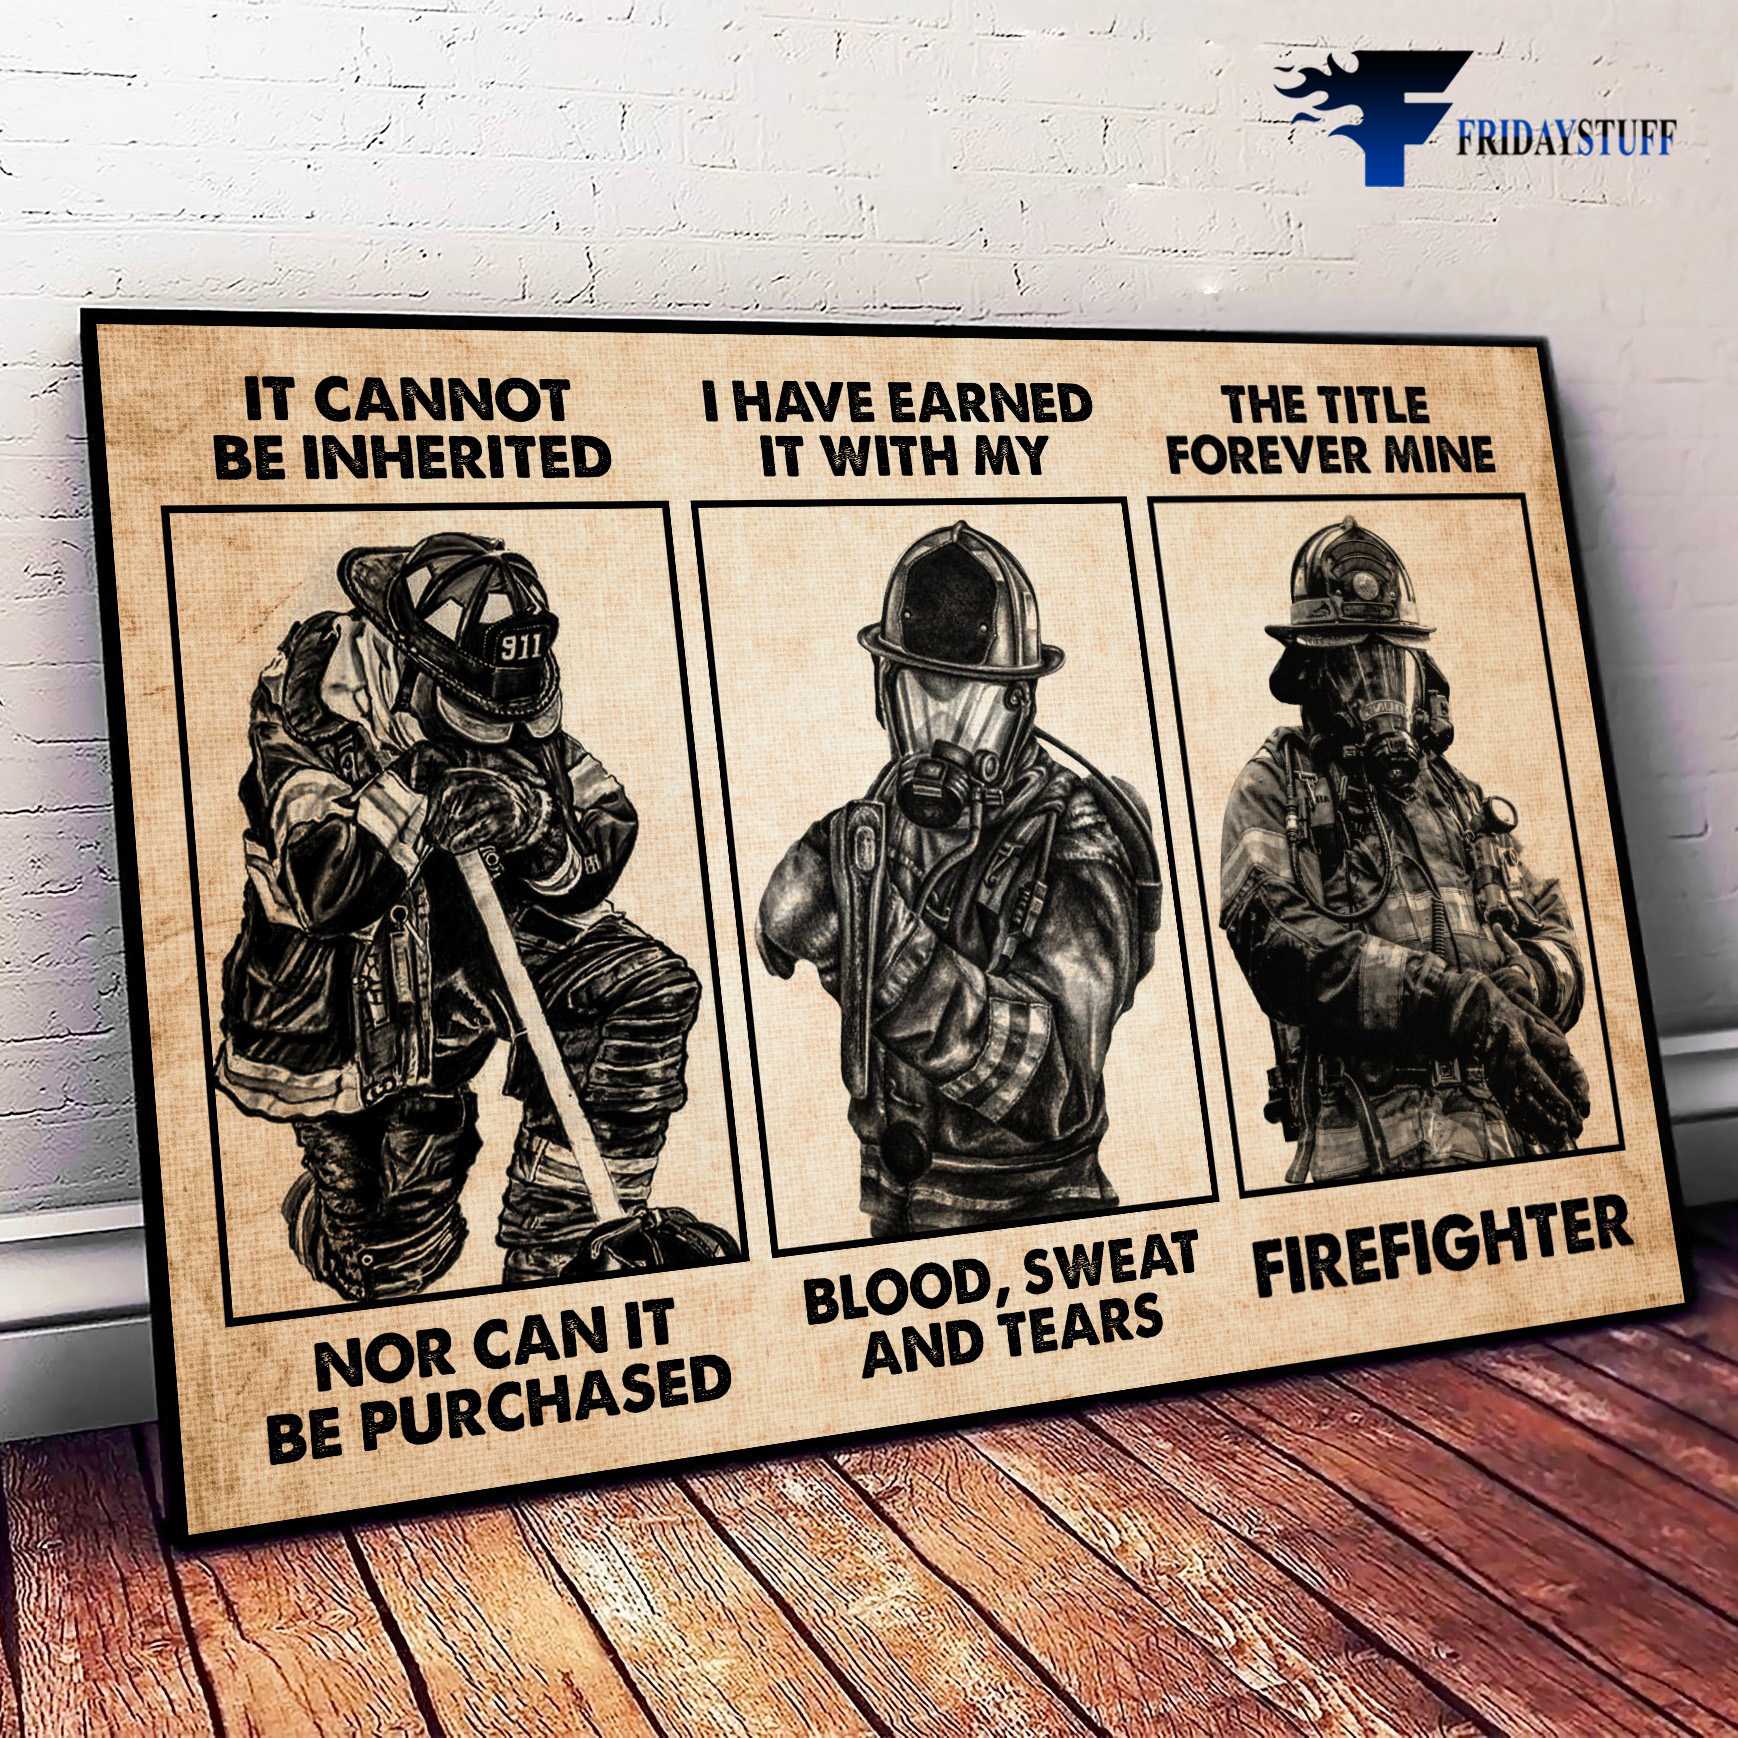 Firefighter Poster, Gift For Firefighter, It Cannot Be Inherited, Nor Can It Be Purchased, I Have Earned It With My, Blood, Sweat And Tears, The Title Forever Mind Firefighter